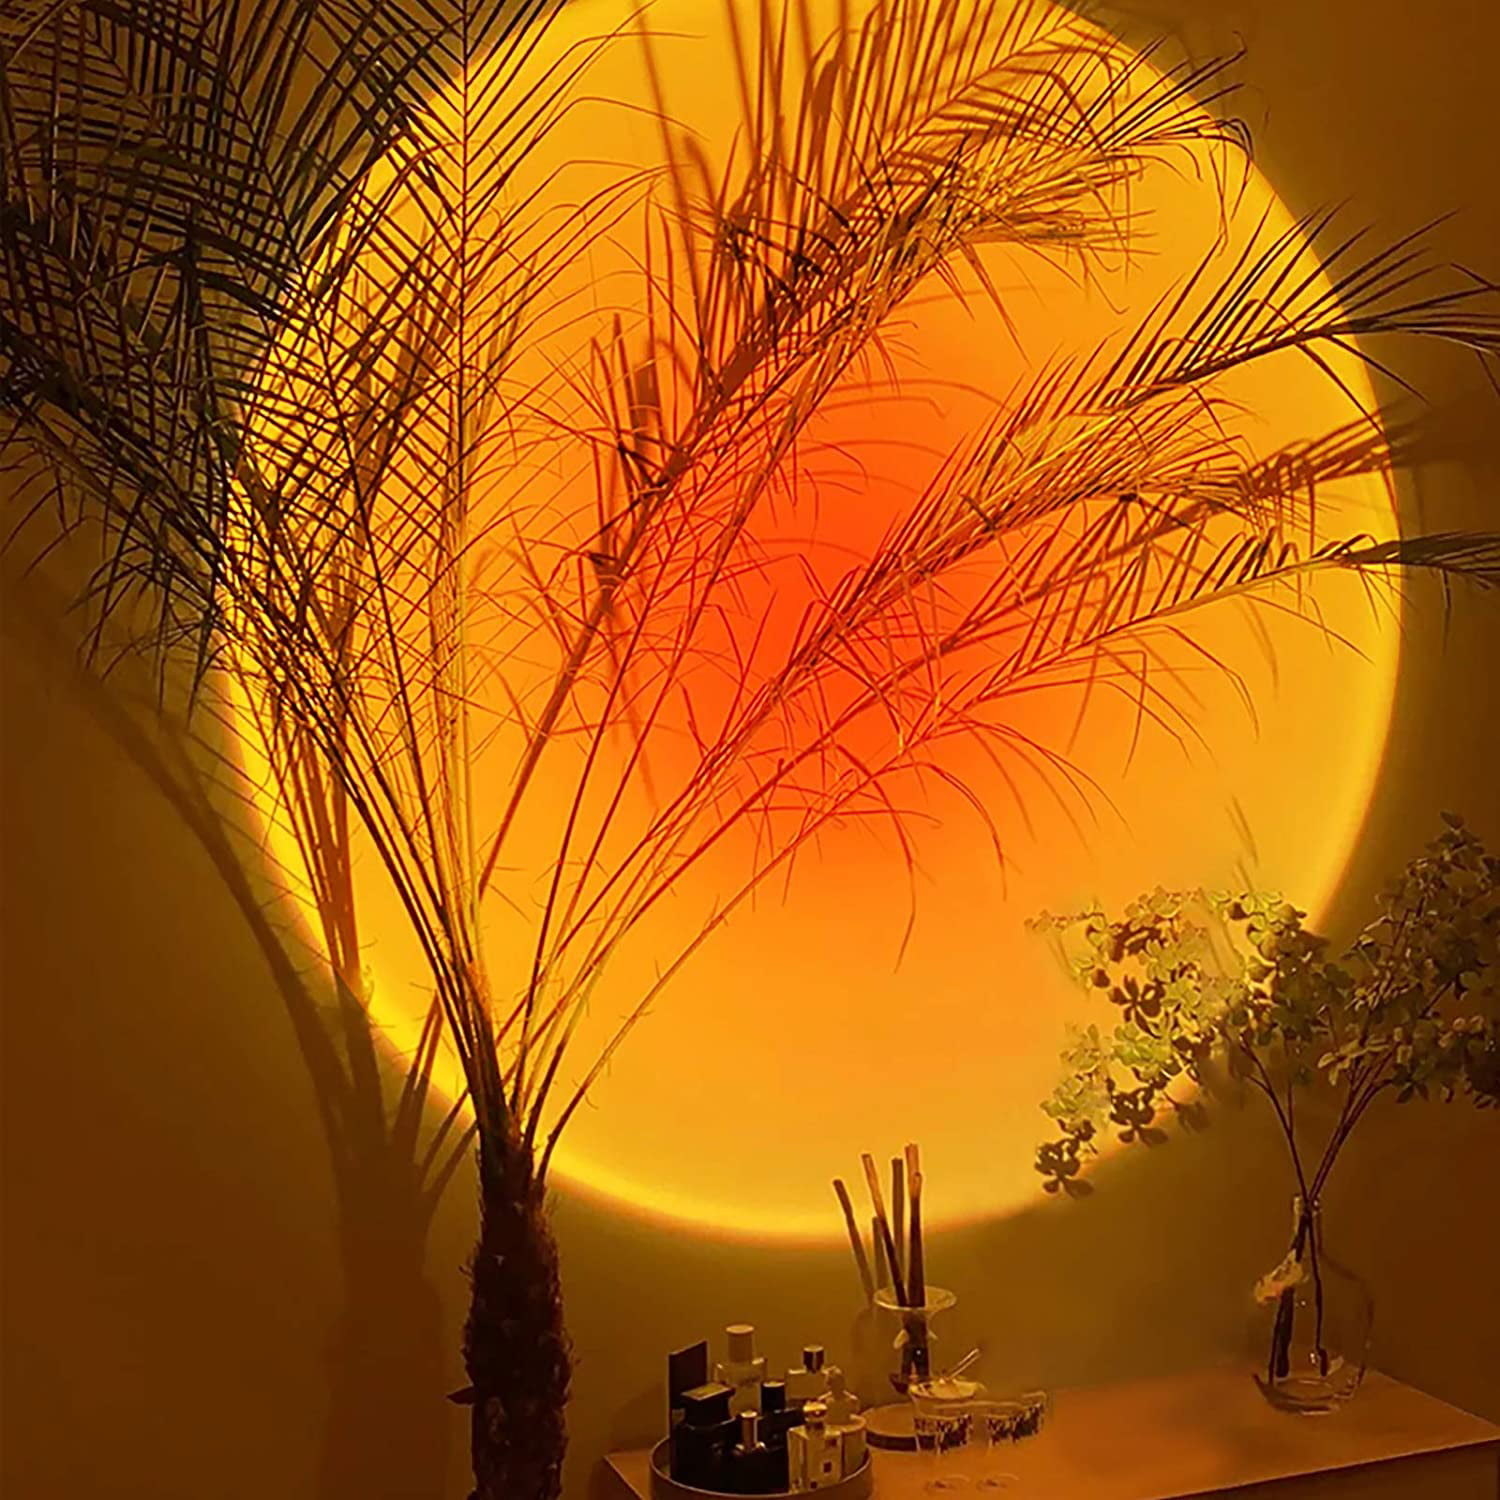 what the sunset lamp looks like on the wall which offers the room a dark orange ambiance